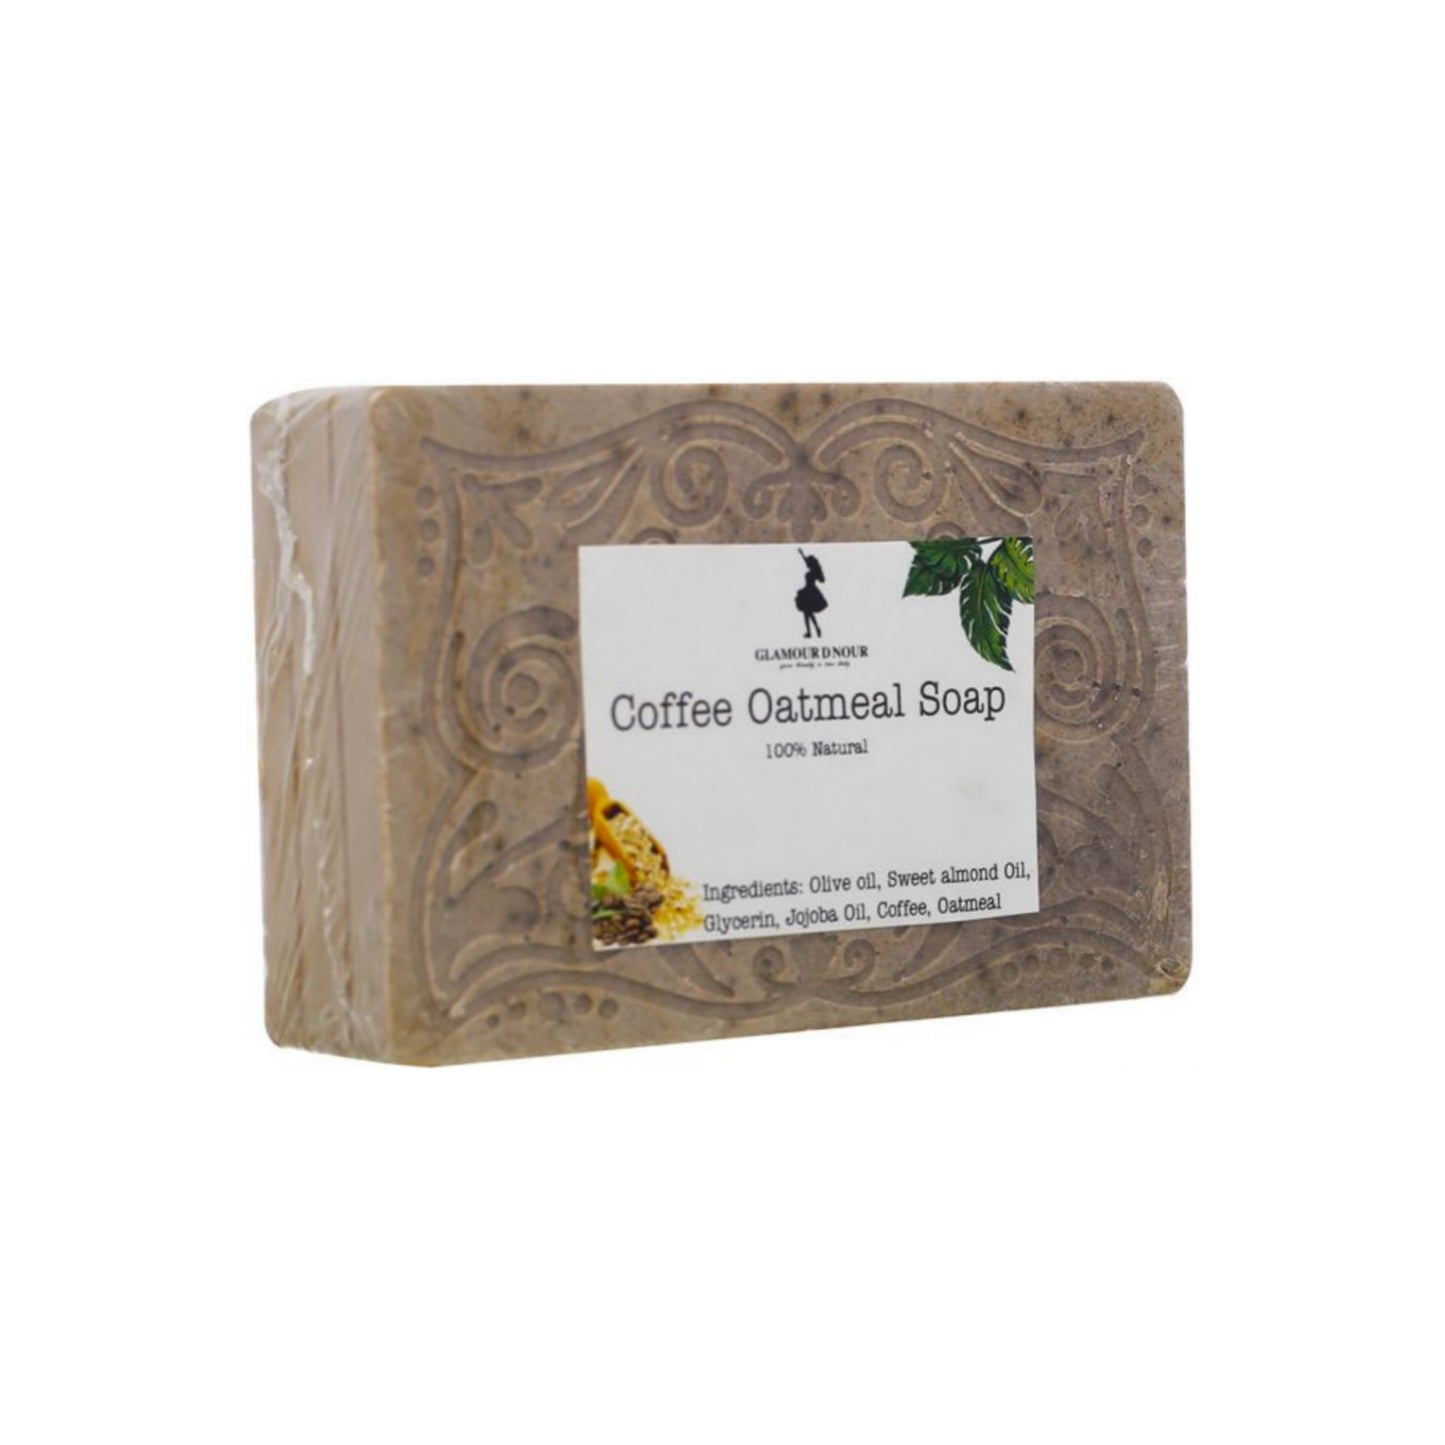 Exfoliating coffee soap with oatmeal